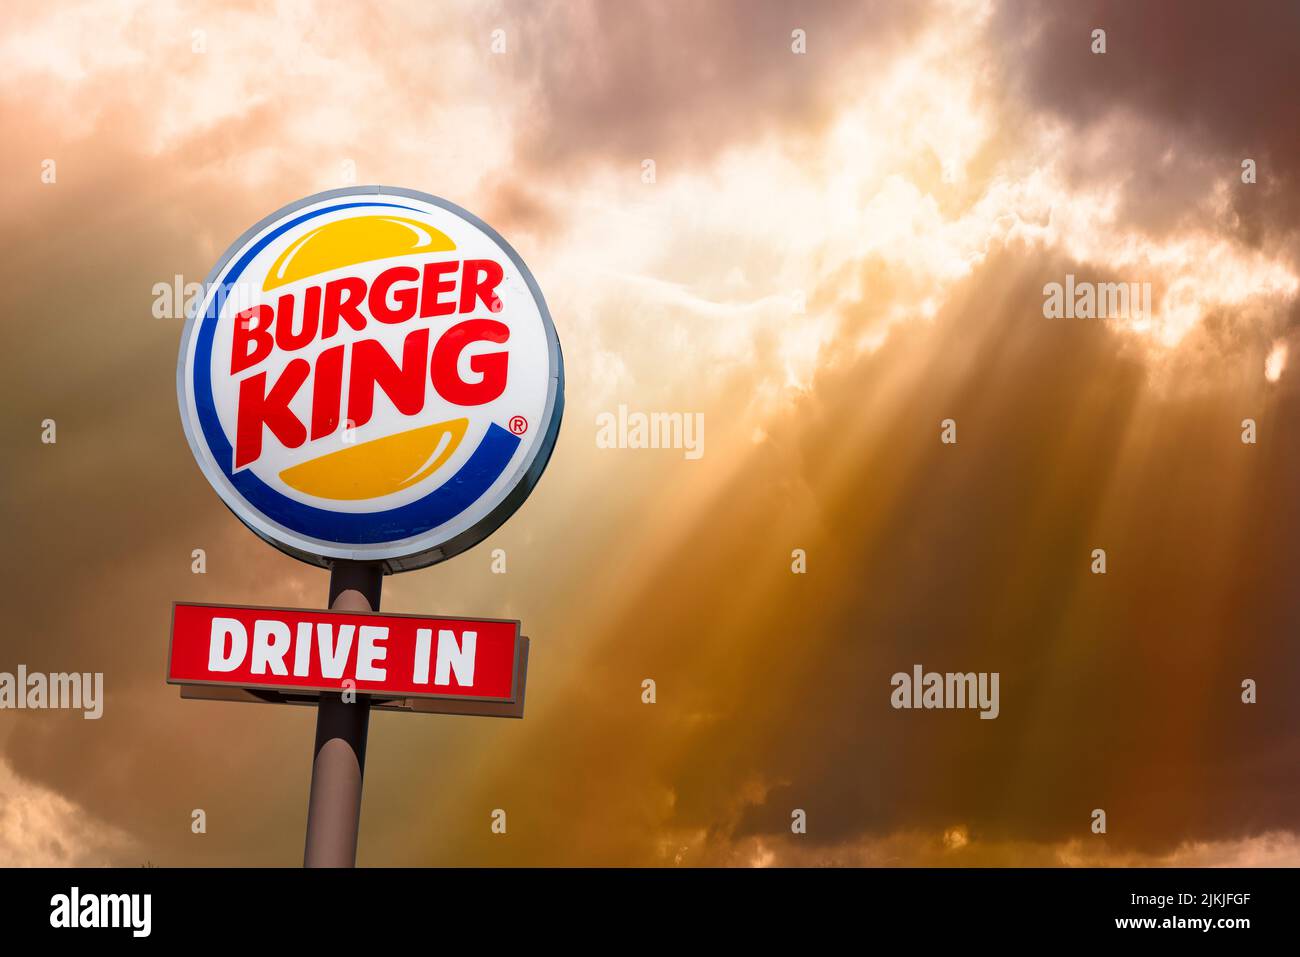 Advertising sign of the company BURGER KING Stock Photo